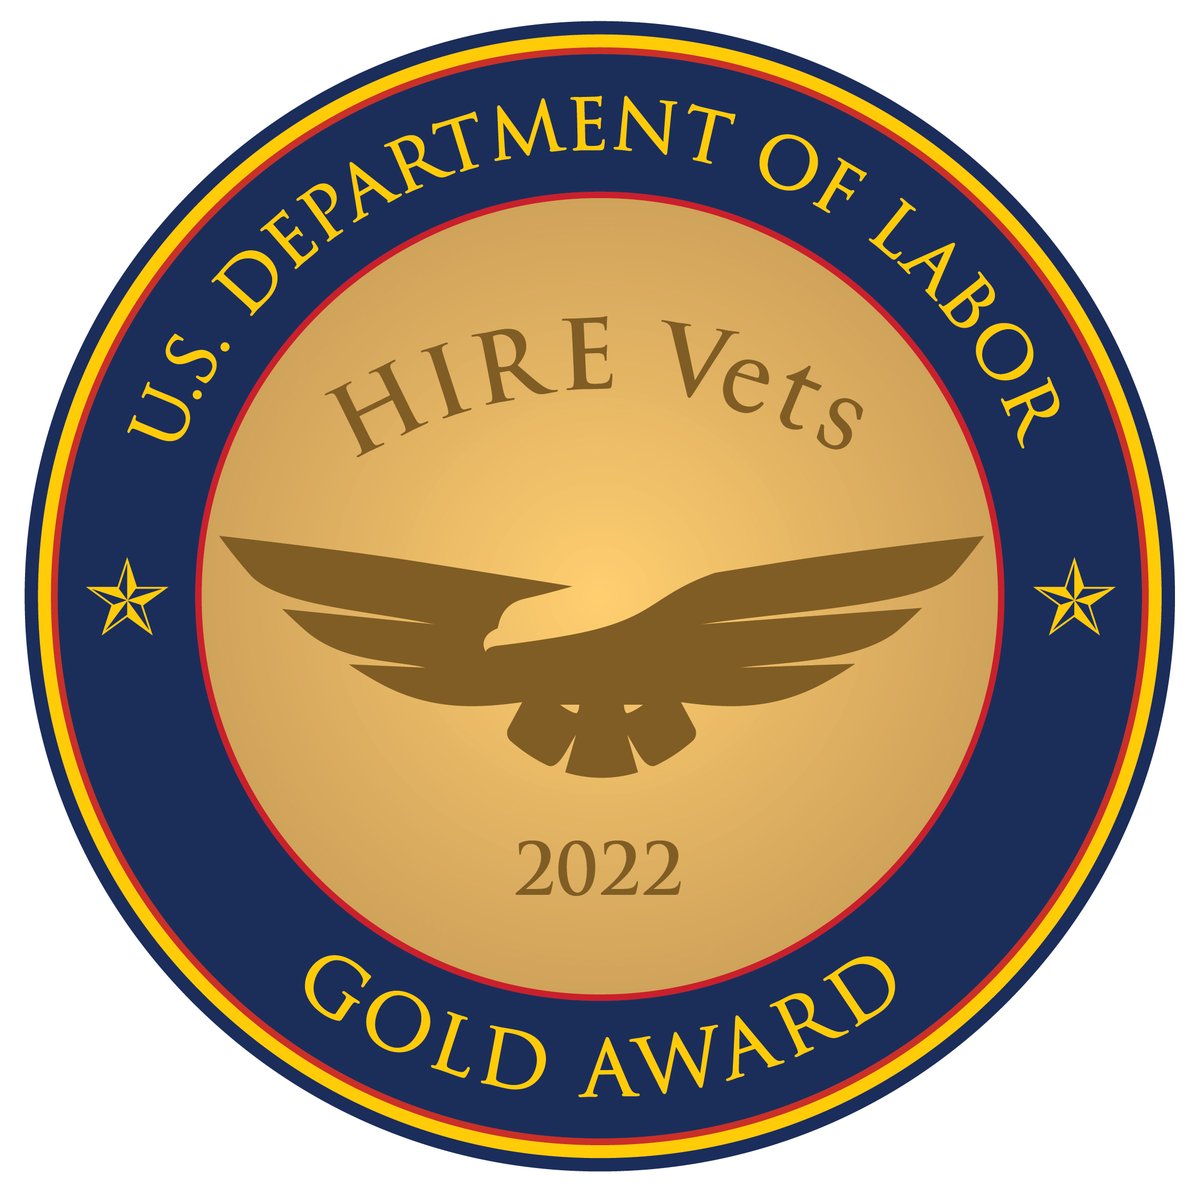 At DuPont, we’re proud to be a recipient of the HIRE Vets Medallion Award for a third consecutive year. This recognition demonstrates our commitment to veteran hiring, retention, and professional development that bring about a diverse and innovative workforce.